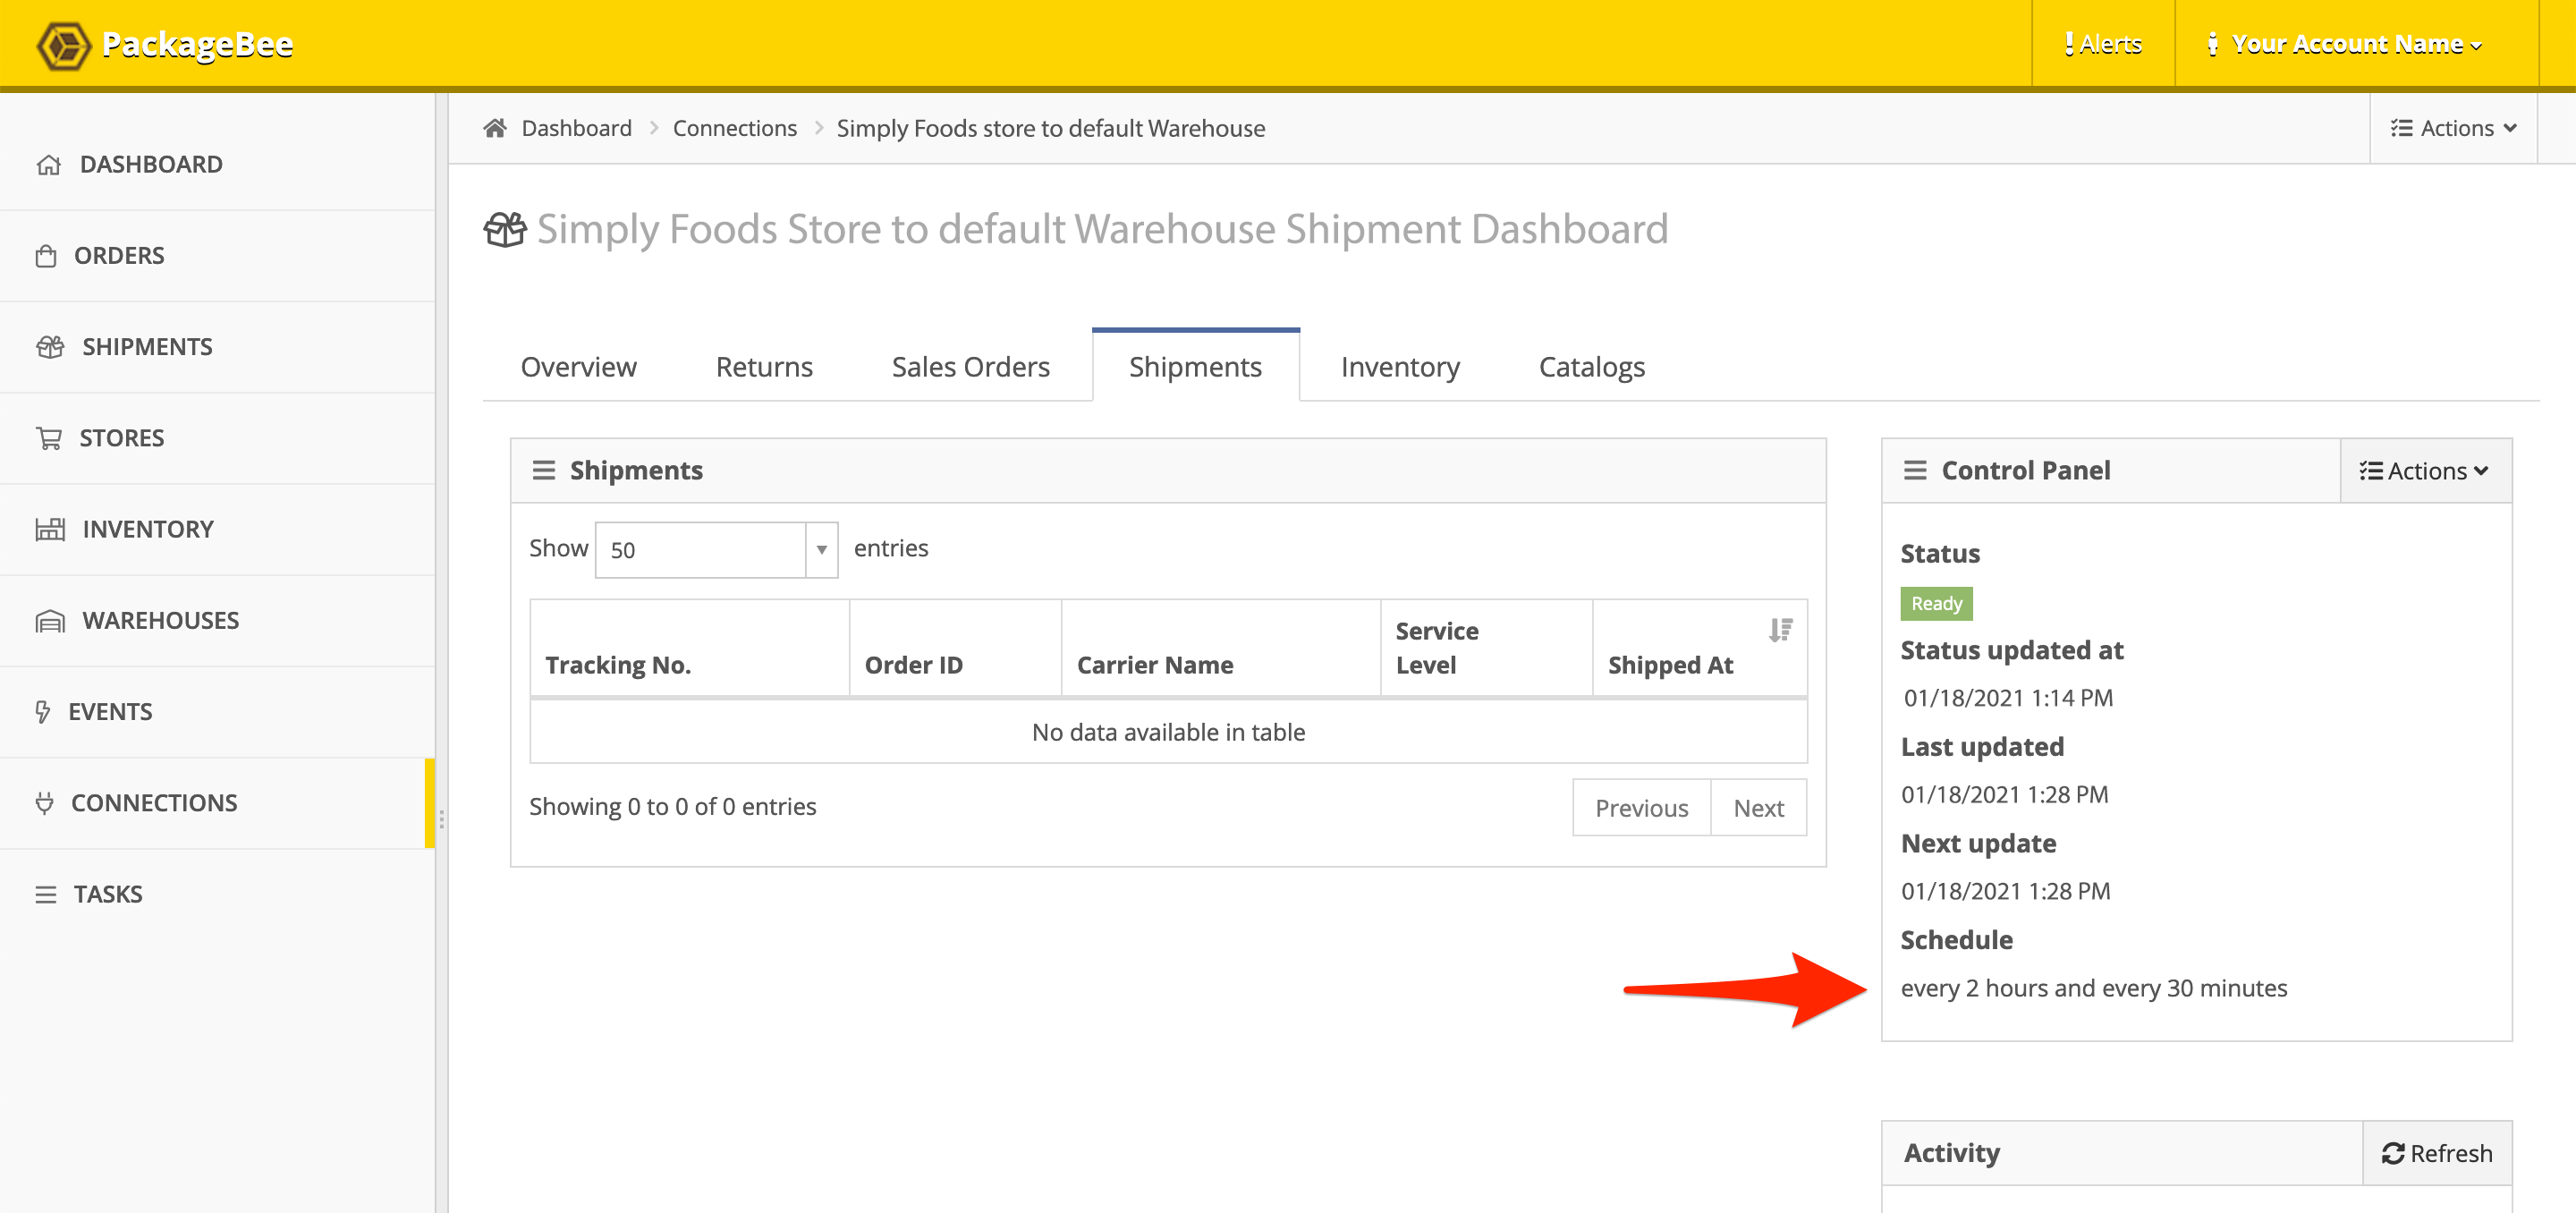 The updated schedule is shown in the Control Panel of the Shipments Dashboard.